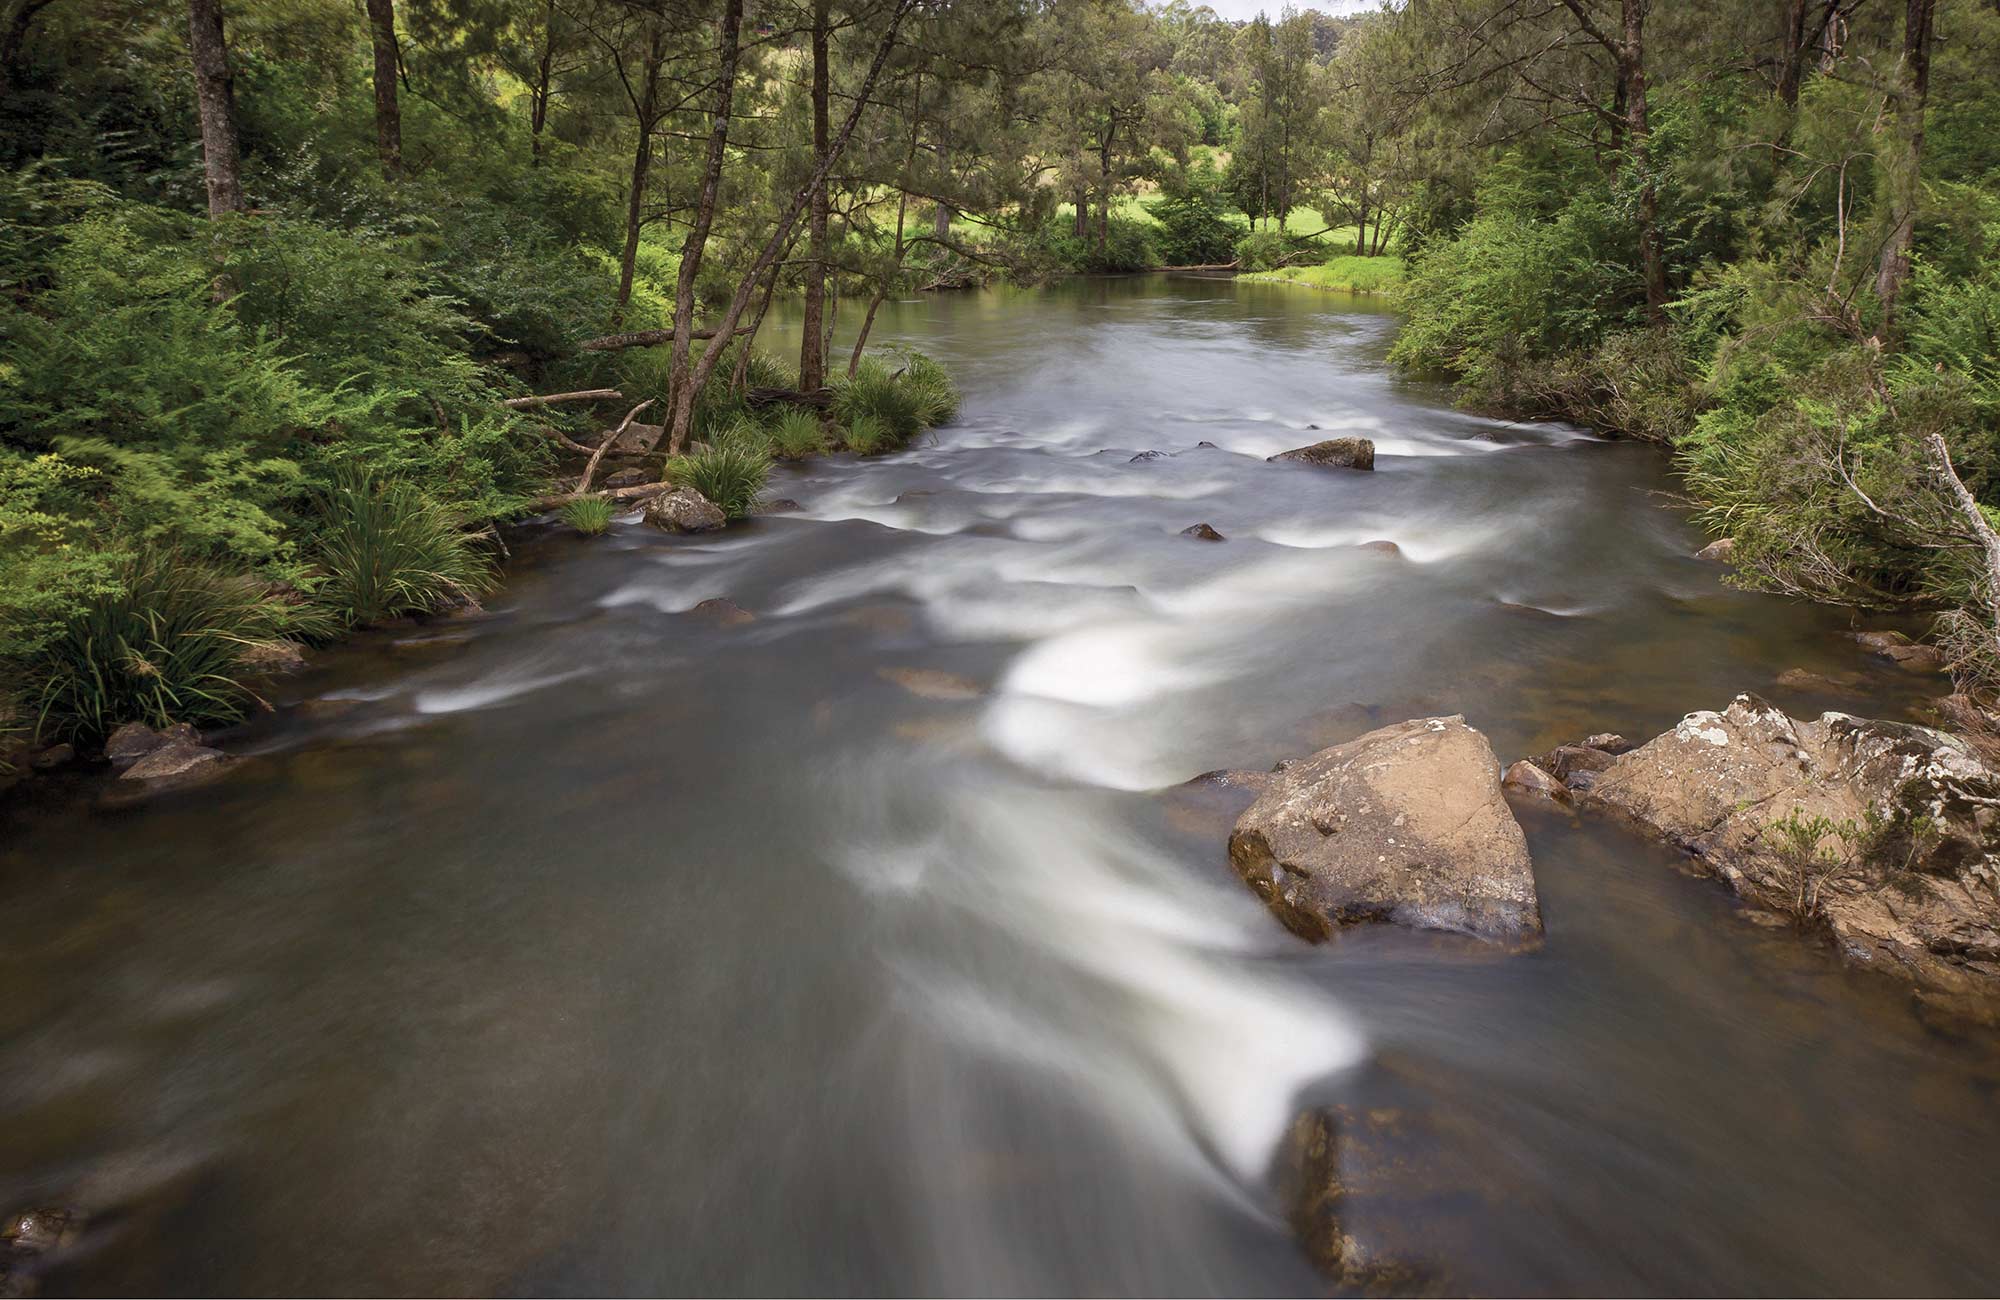 Water rushes over rocks in the Nymboida River in Nymboi-Binderay National Park. Photo: Robert Cleary &copy; Robert Cleary